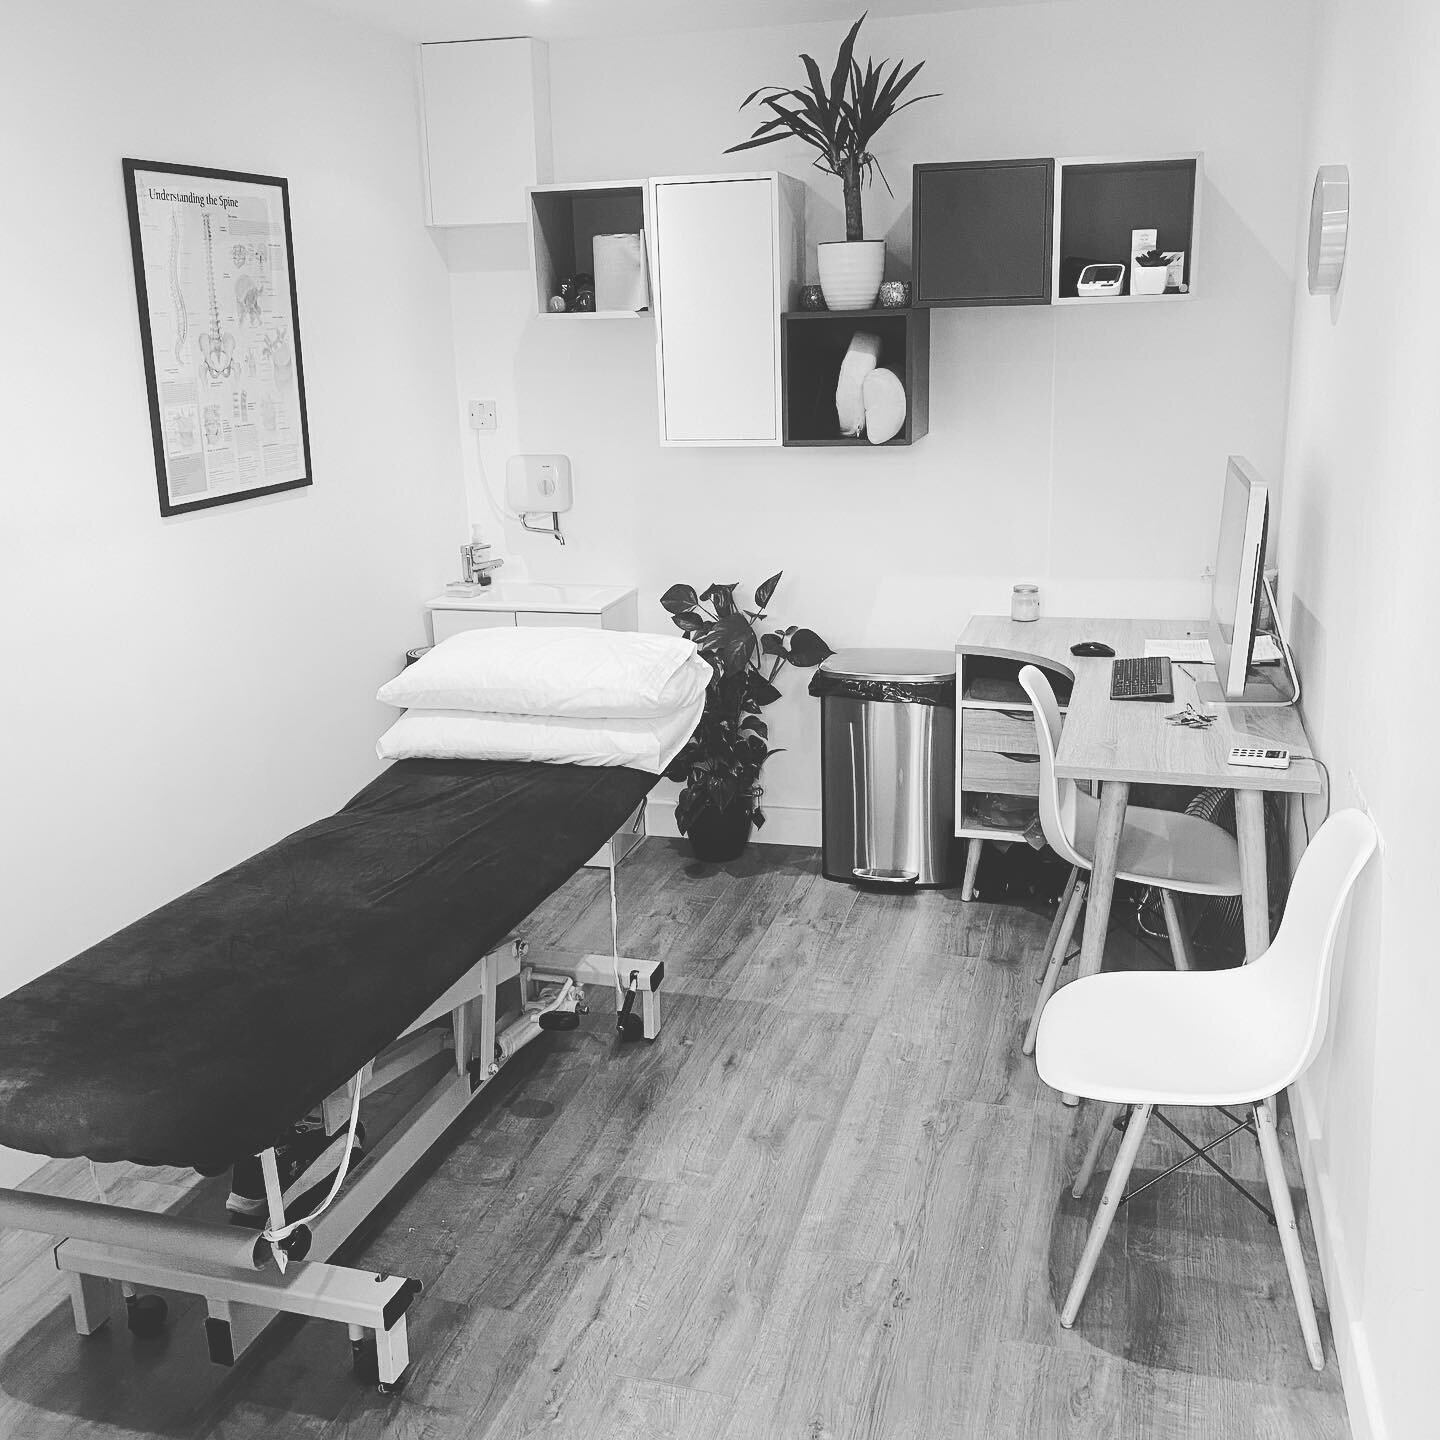 Facilities here at Haringey Osteopaths to cater for all your injury needs. Treatment room, Fully Equipped Gym and Treadmill for gait assessment. We have you covered!